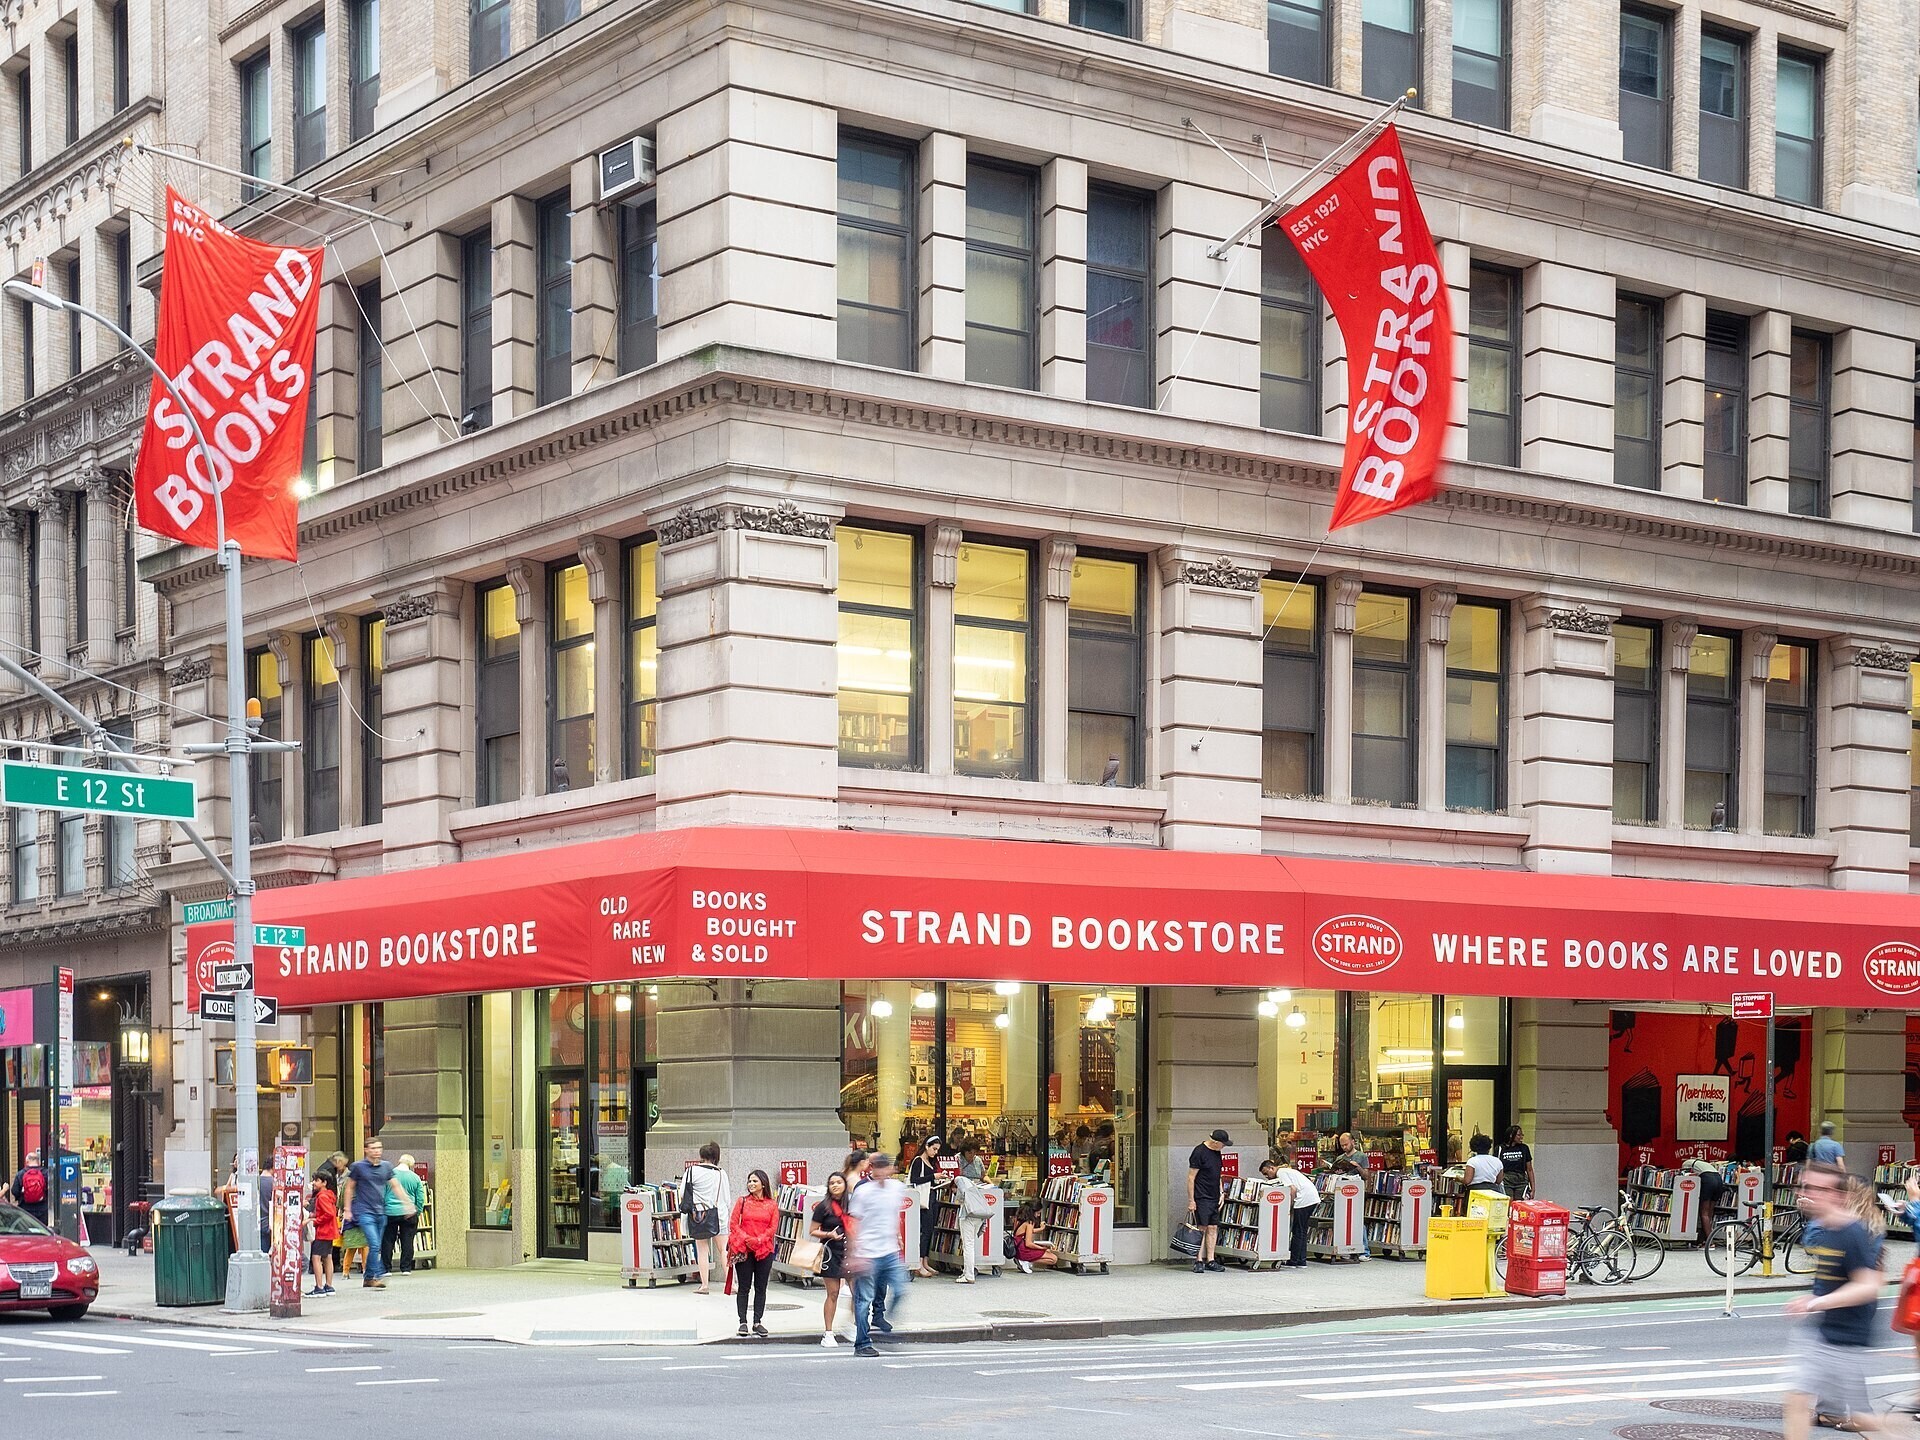 Exterior of Strand Bookstore with reddish  awnings and radical   browsing outdoor bookshelves